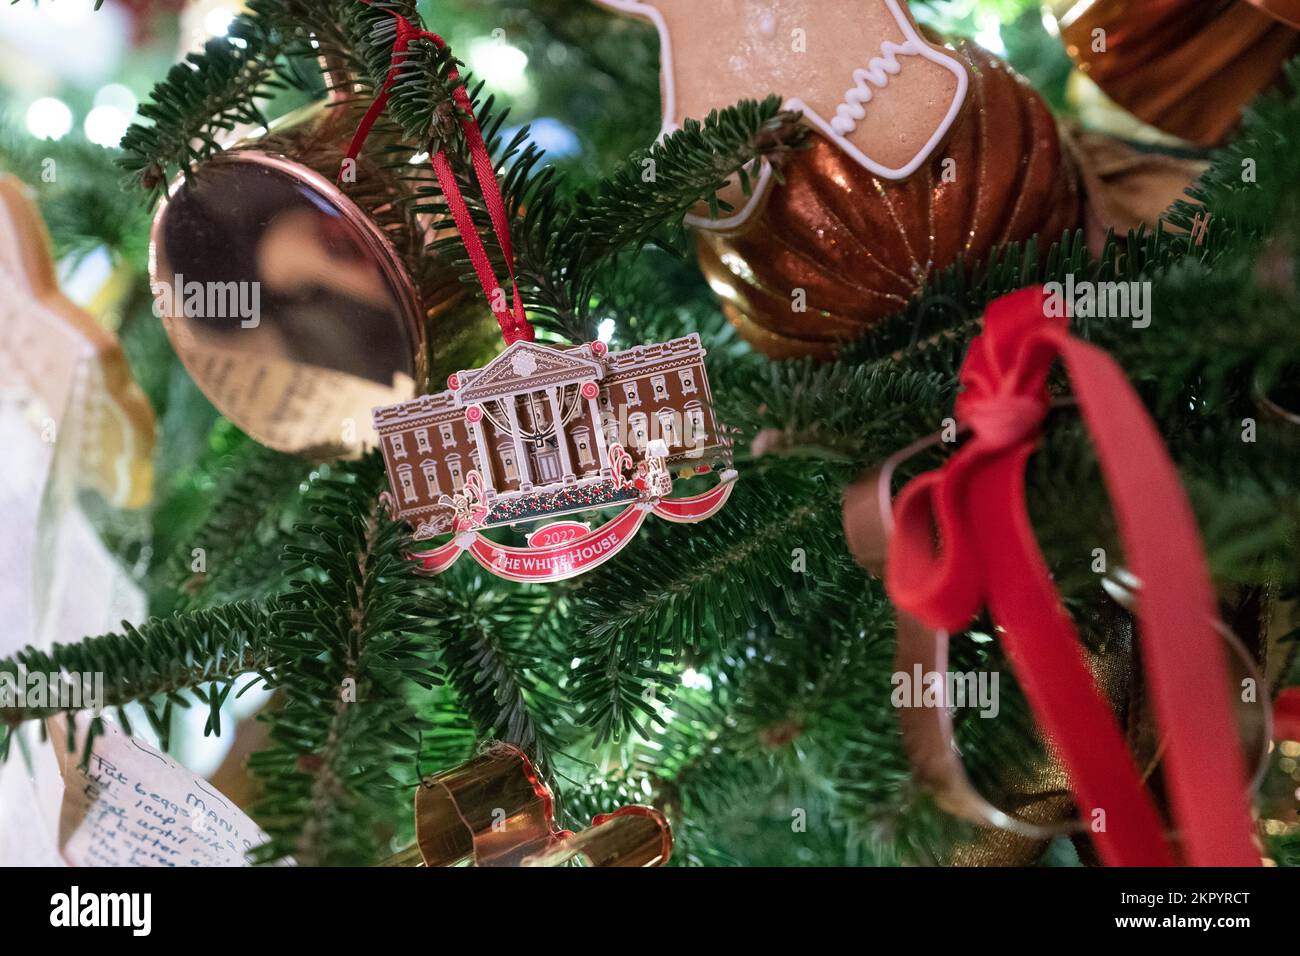 https://c8.alamy.com/comp/2KPYRCT/the-white-house-christmas-ornament-is-displayed-in-the-china-room-as-the-2022-white-house-christmas-decorations-are-previewed-in-the-white-house-in-washington-dc-on-monday-november-28-2022-this-years-holiday-theme-is-we-the-people-credit-chris-kleponiscnp-2KPYRCT.jpg